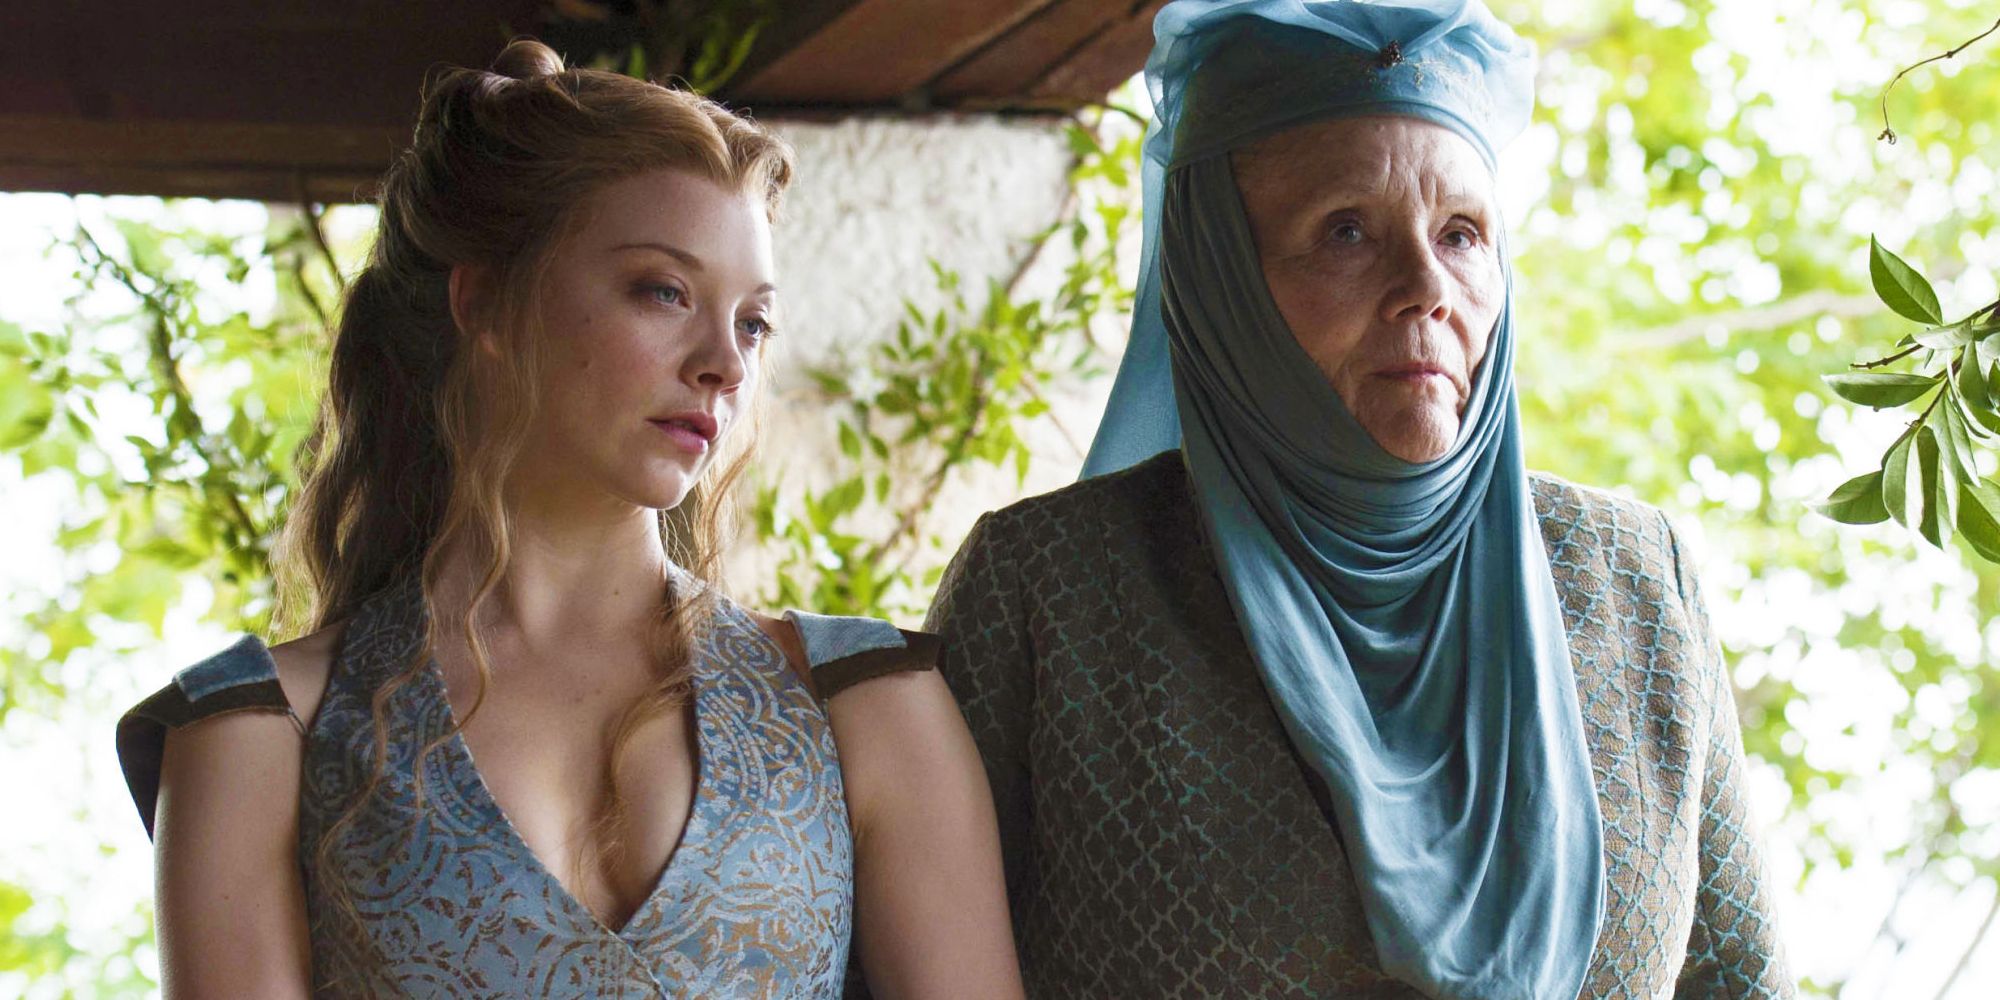 Olenna (Diana Rigg) and Margaery (Natalie Dormer) in 'Game of Thrones'